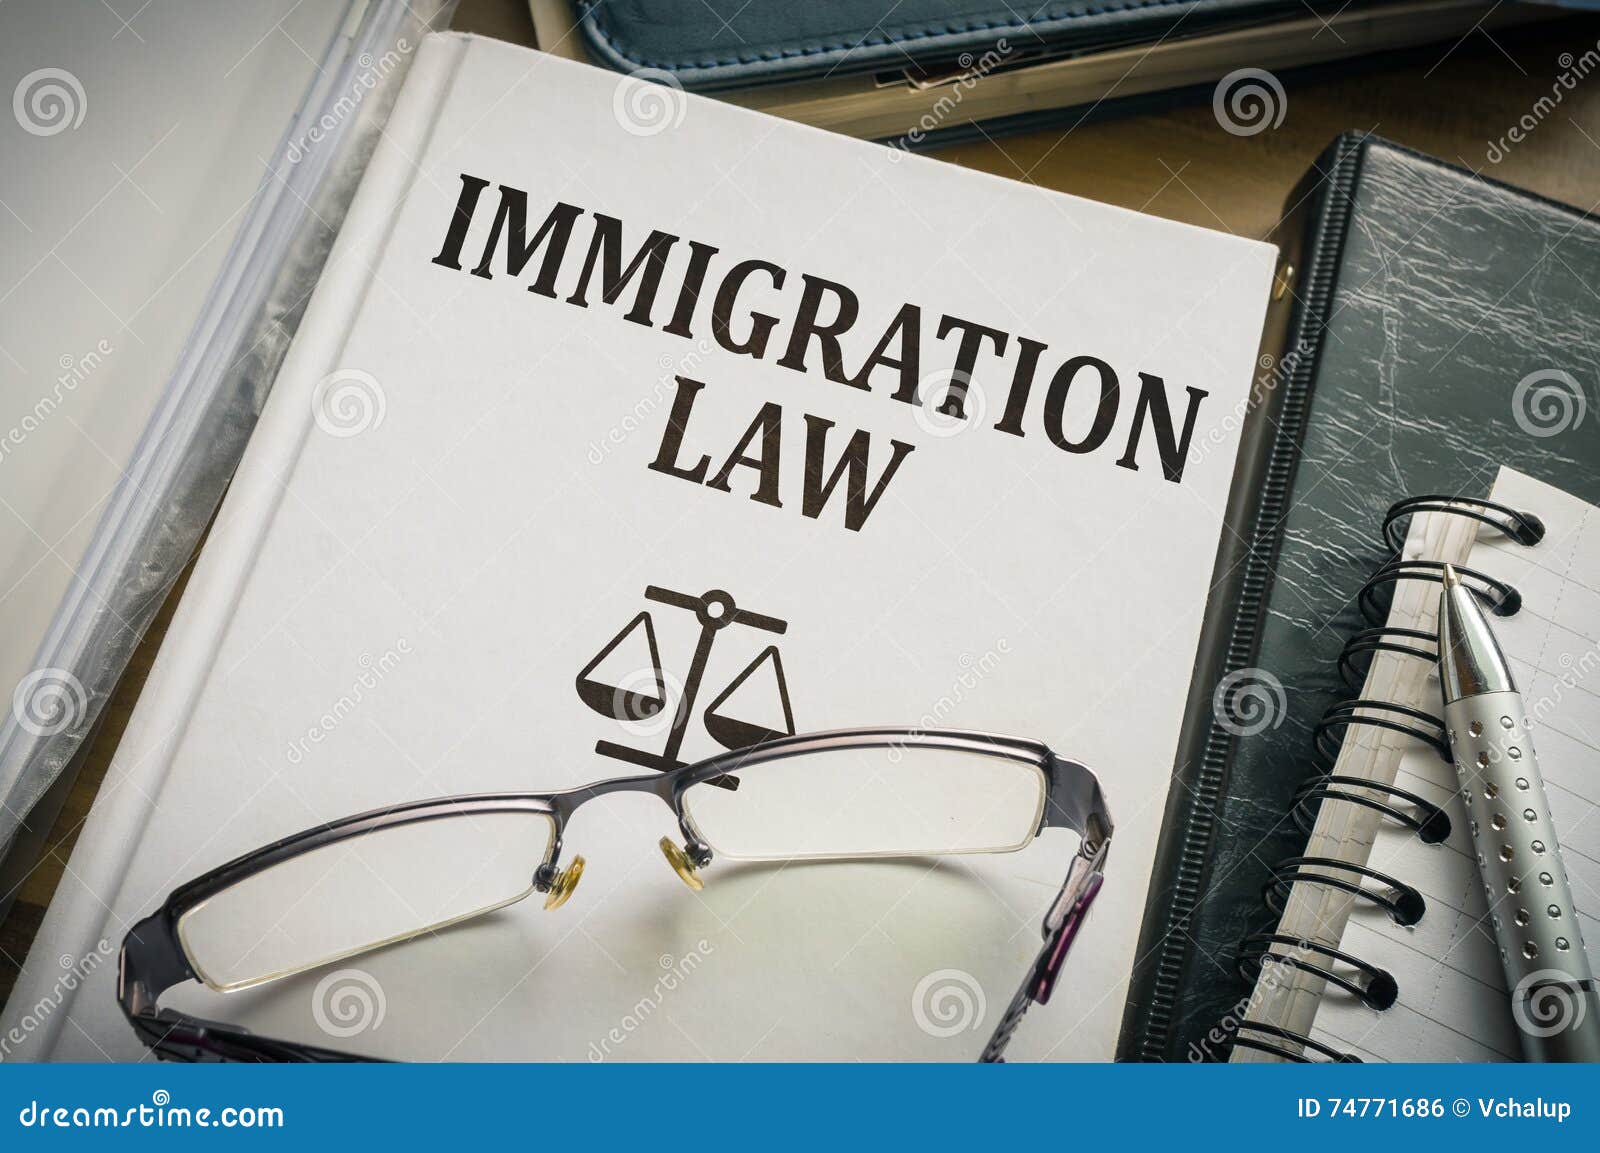 immigration law book. legislation and justice concept